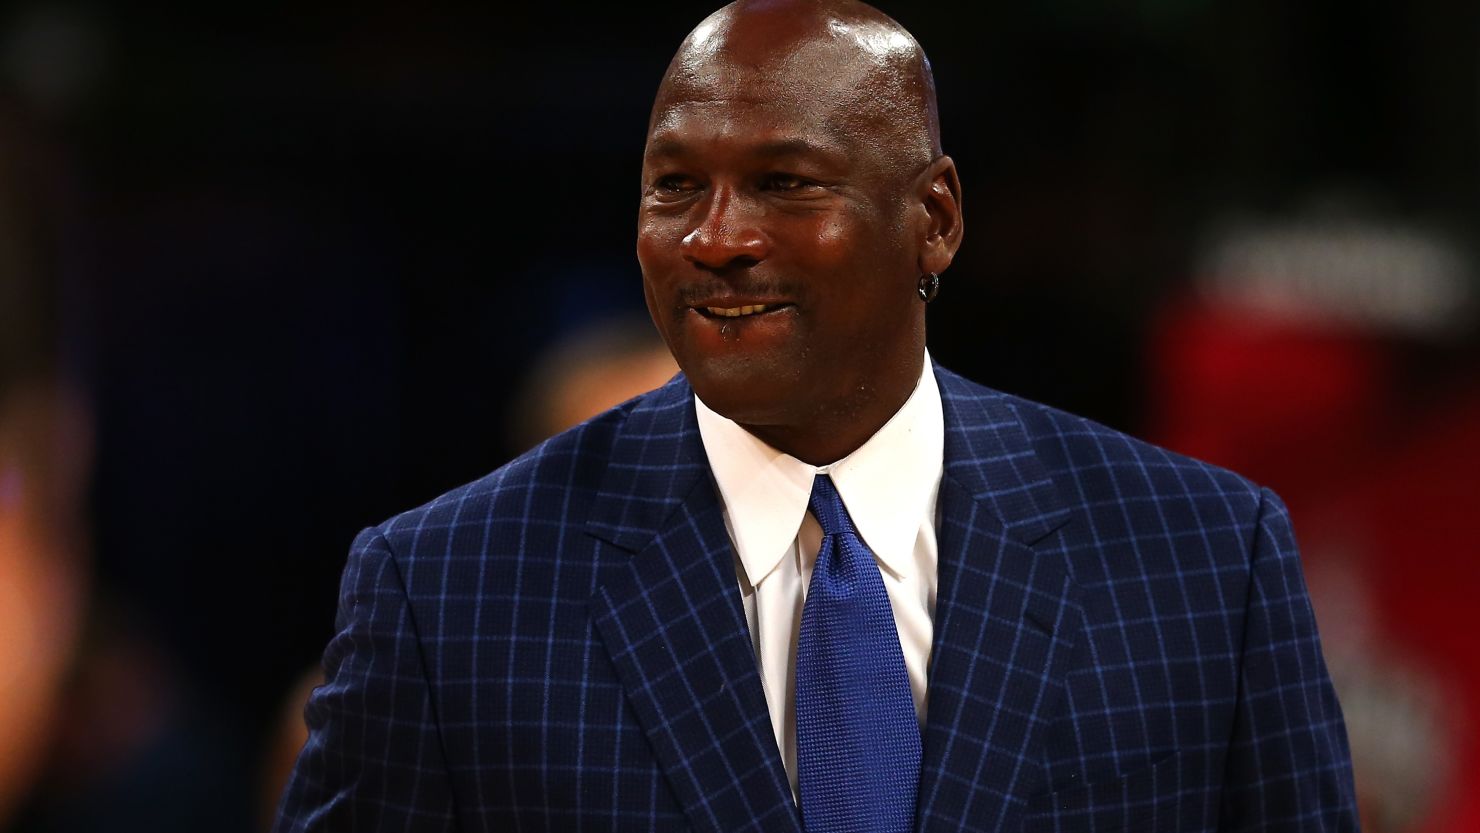 TORONTO, ON - FEBRUARY 14:  NBA hall of famer and Charlotte Hornets owner Michael Jordan walks off the court during the NBA All-Star Game 2016 at the Air Canada Centre on February 14, 2016 in Toronto, Ontario. NOTE TO USER: User expressly acknowledges and agrees that, by downloading and/or using this Photograph, user is consenting to the terms and conditions of the Getty Images License Agreement.  (Photo by Elsa/Getty Images)